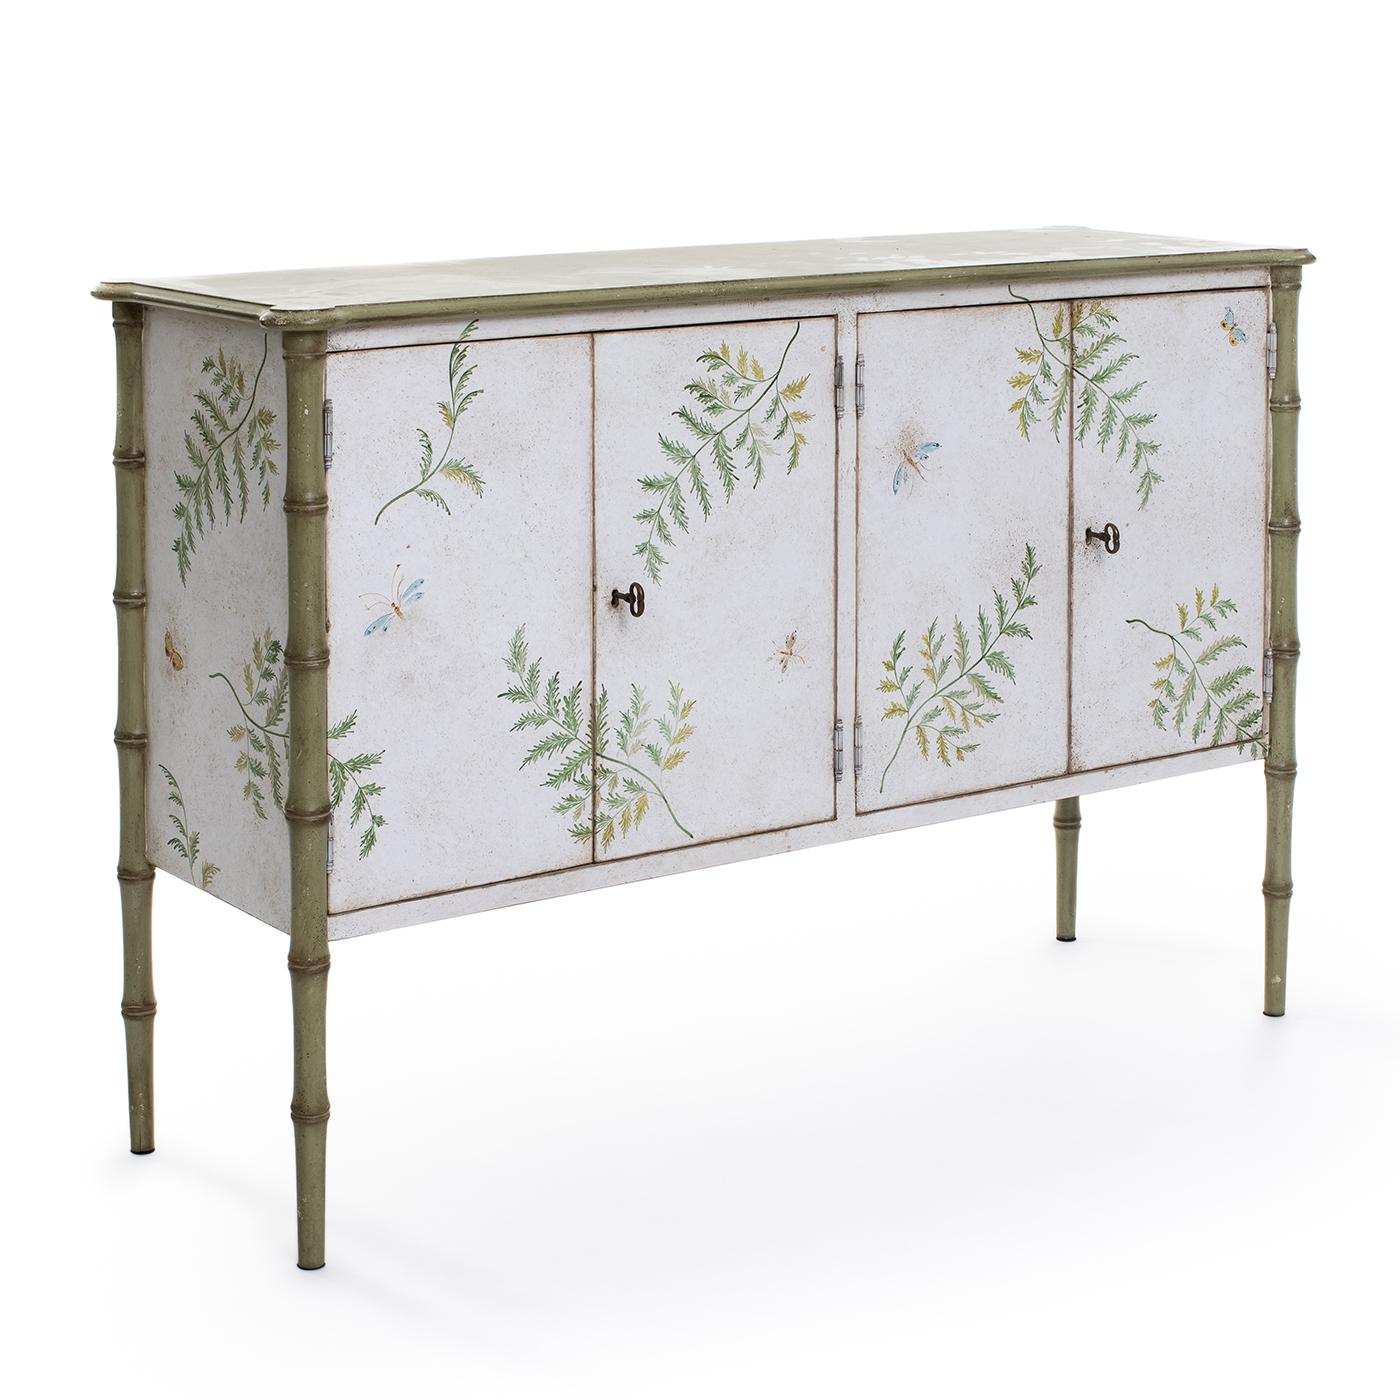 Introducing the large Lombardia Bamboo cabinet, a true delight for your space. Featuring apple-green bamboo and playful butterflies, this whimsical cabinet is a source of joy and amusement. Its larger size allows for ample storage while maintaining